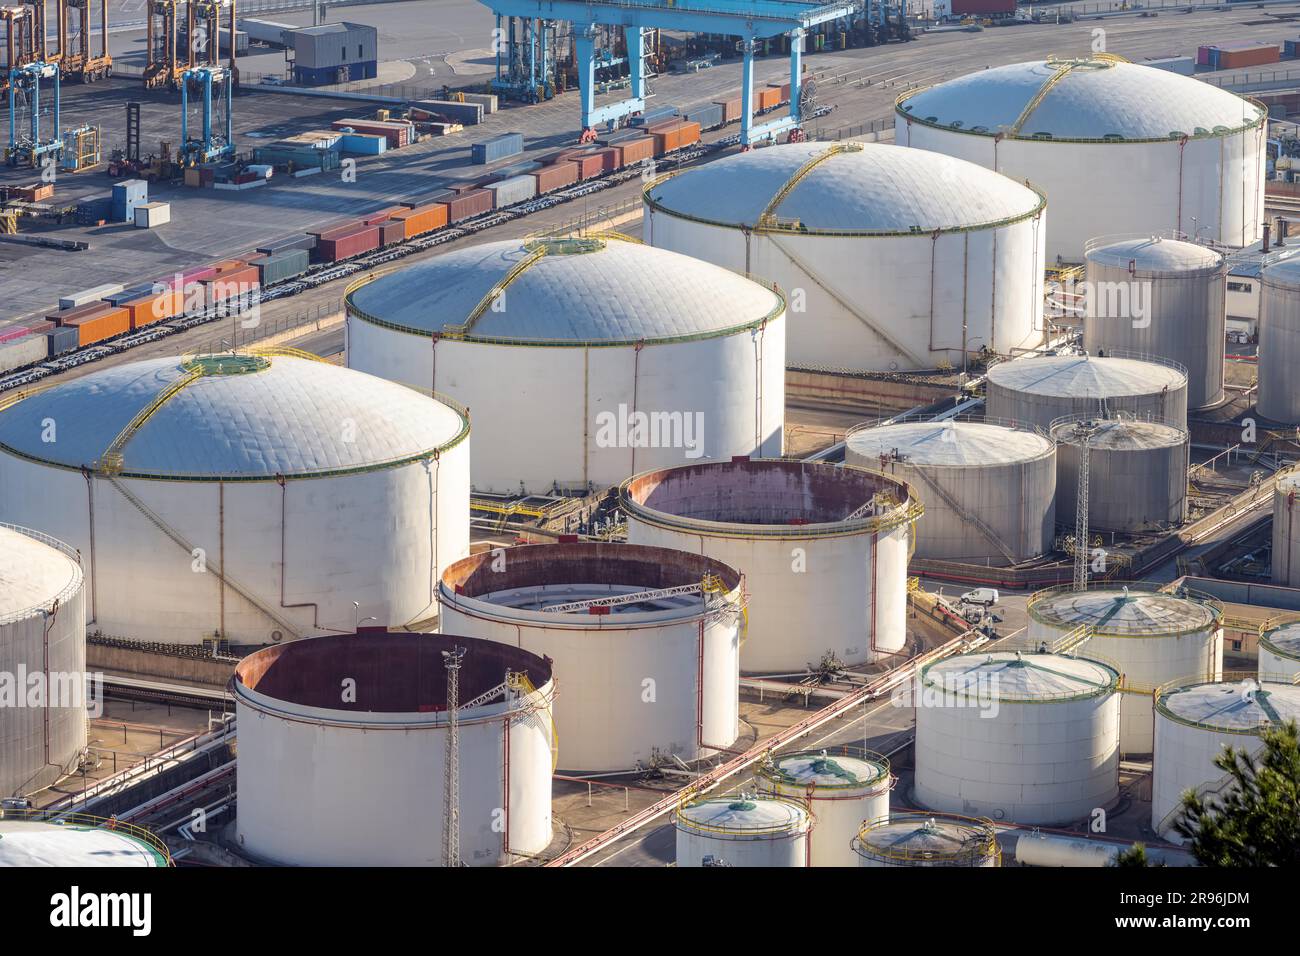 Gas tanks and containers in the commercial port of Barcelona Stock Photo